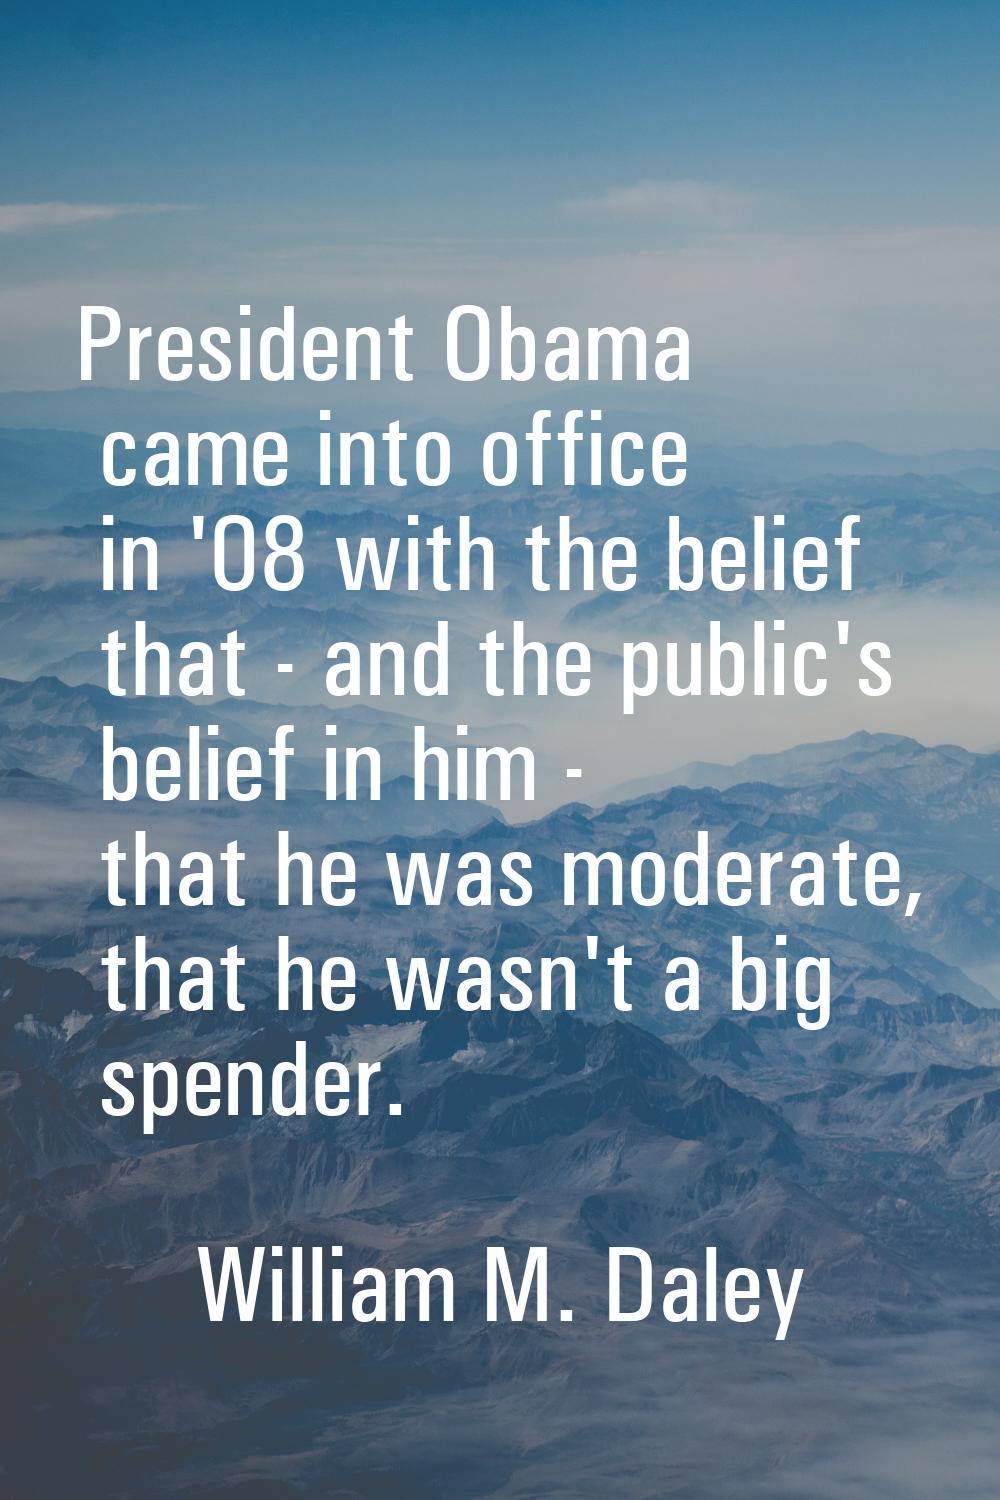 President Obama came into office in '08 with the belief that - and the public's belief in him - tha